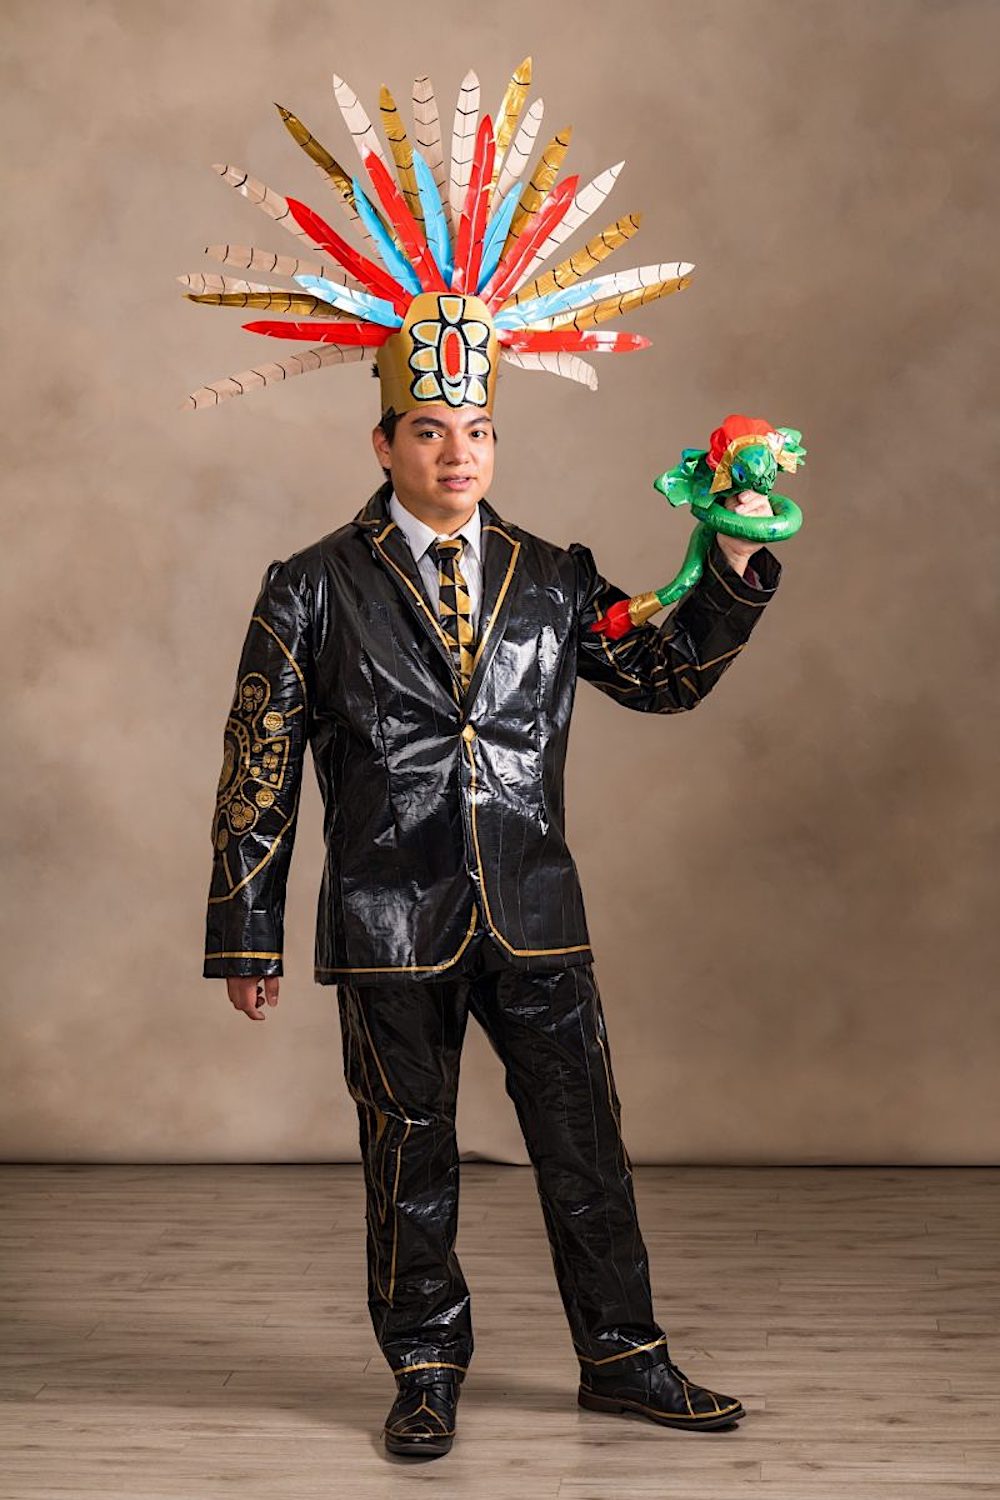 Aztec-inspired tux and headpiece made of duct tape